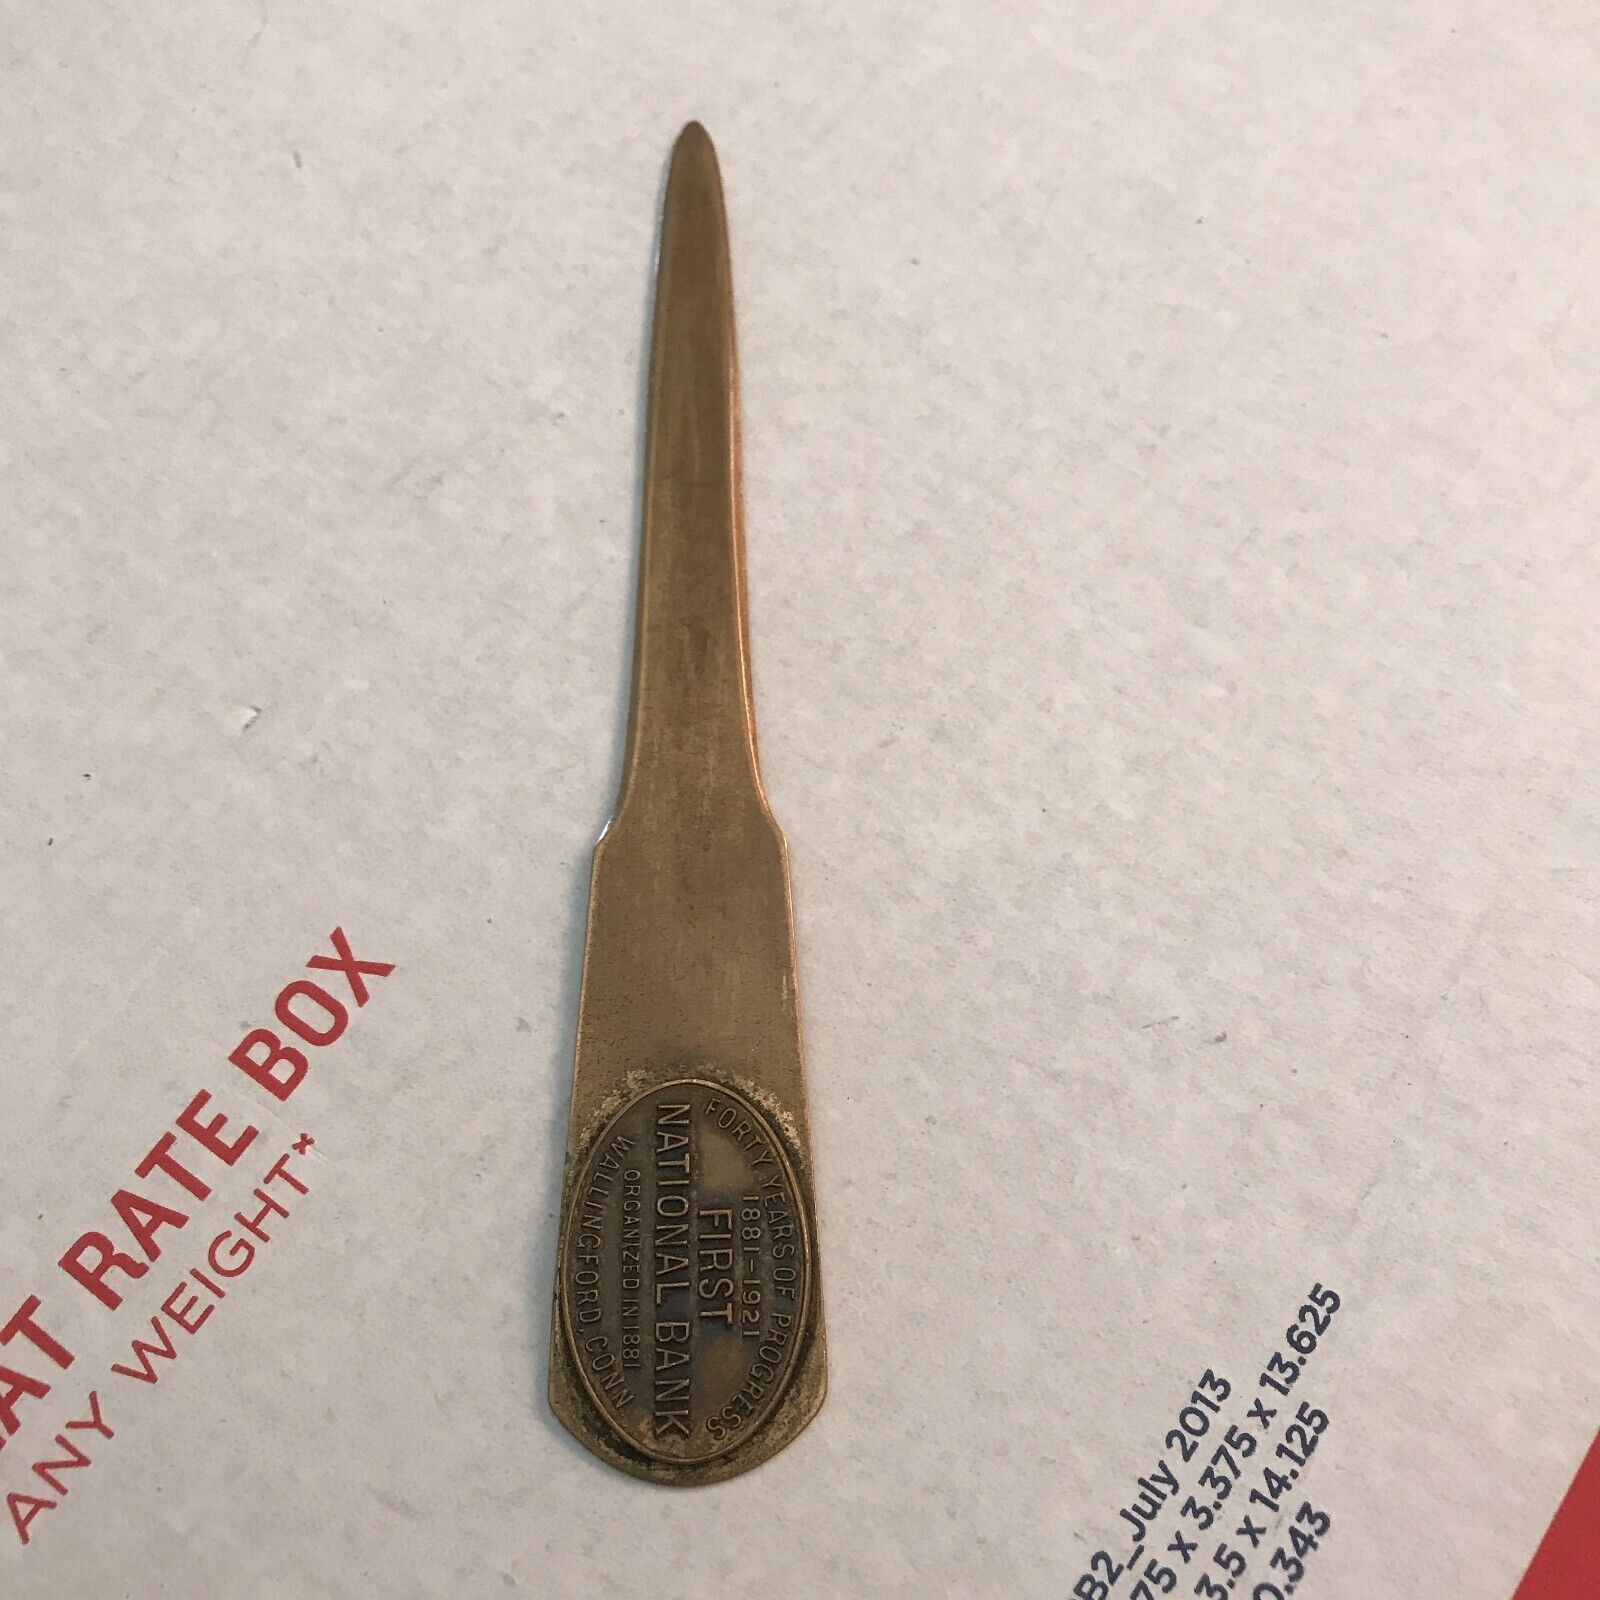 Antique 1921 Genuine Bronze commemorative Letter Opener by First National Bank